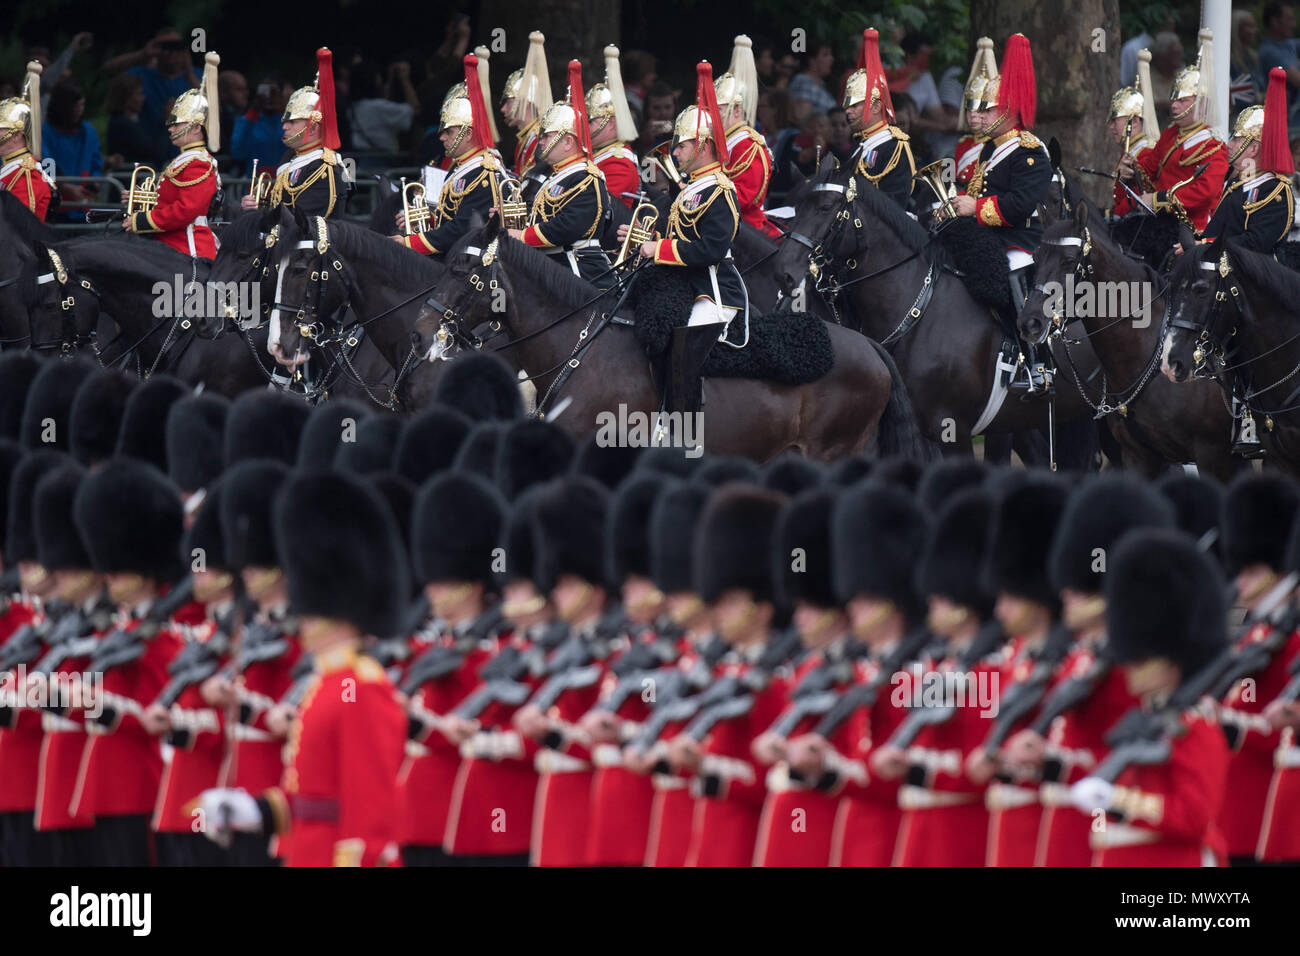 Soldier on horseback during the Colonel's Review, which is the final rehearsal for Trooping the Colour, the Queen's annual birthday parade, in Central London. Stock Photo